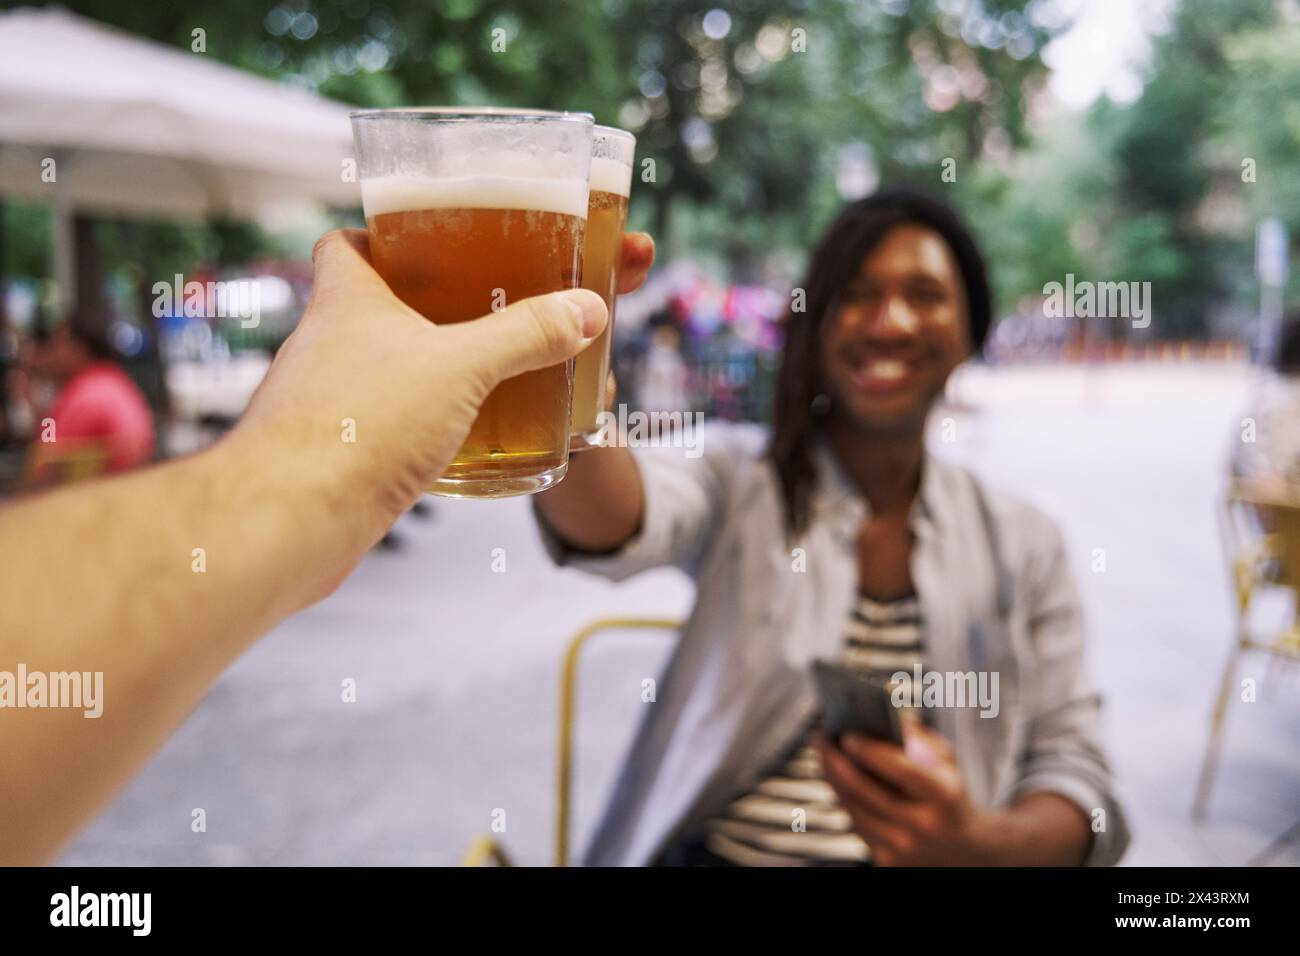 An unrecognizable couple toasting with beer on a bar terrace on a date. Stock Photo